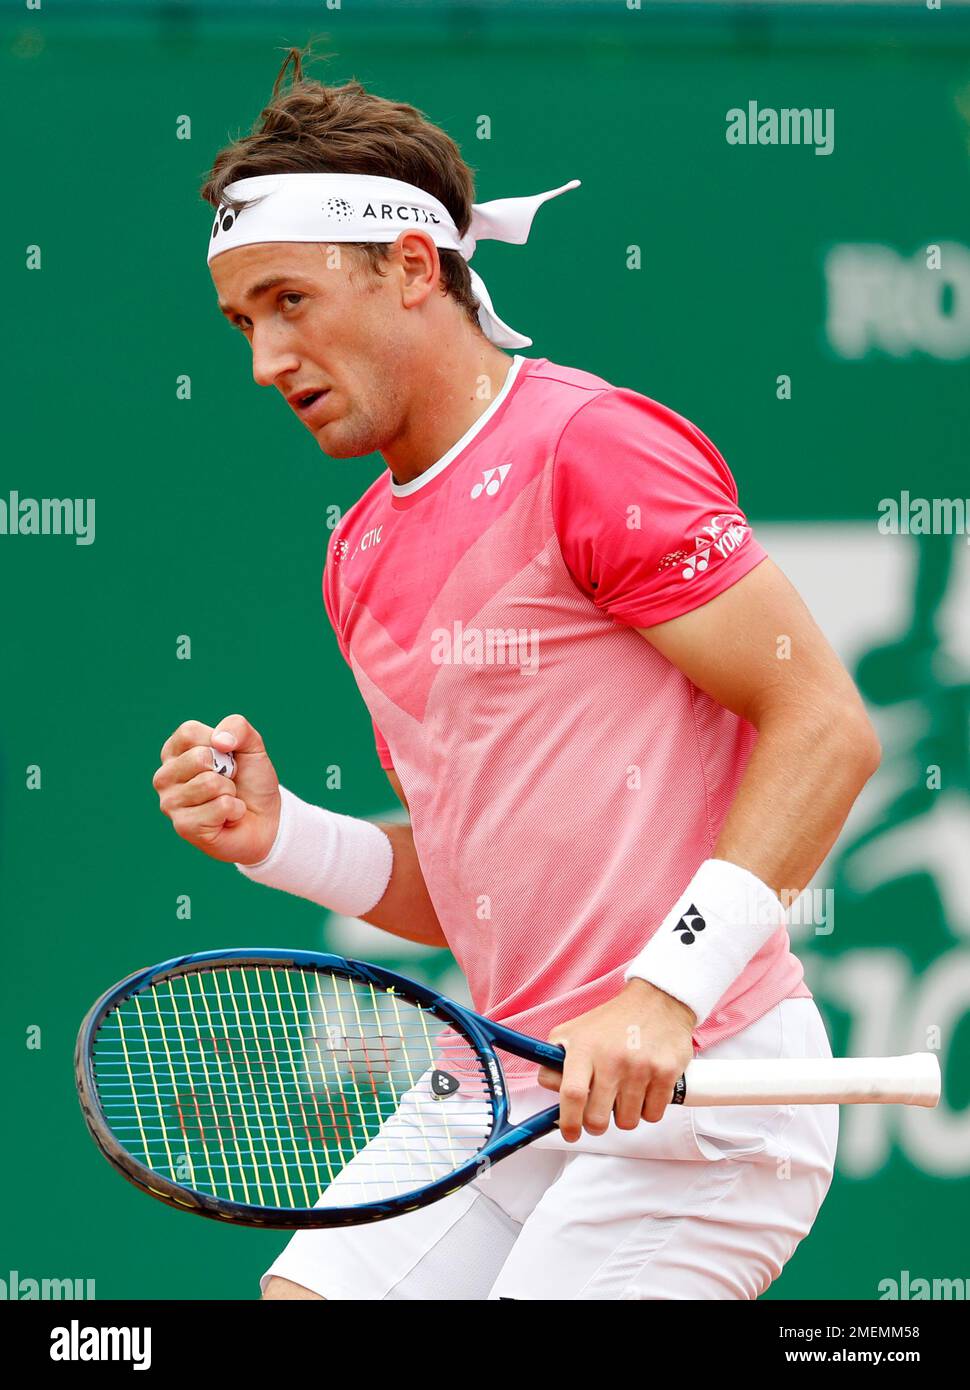 Casper Ruud of Norway celebrates after winning a point against Andrey Rublev of Russia during their semifinal match of the Monte Carlo Tennis Masters tournament in Monaco, Saturday, April 17, 2021